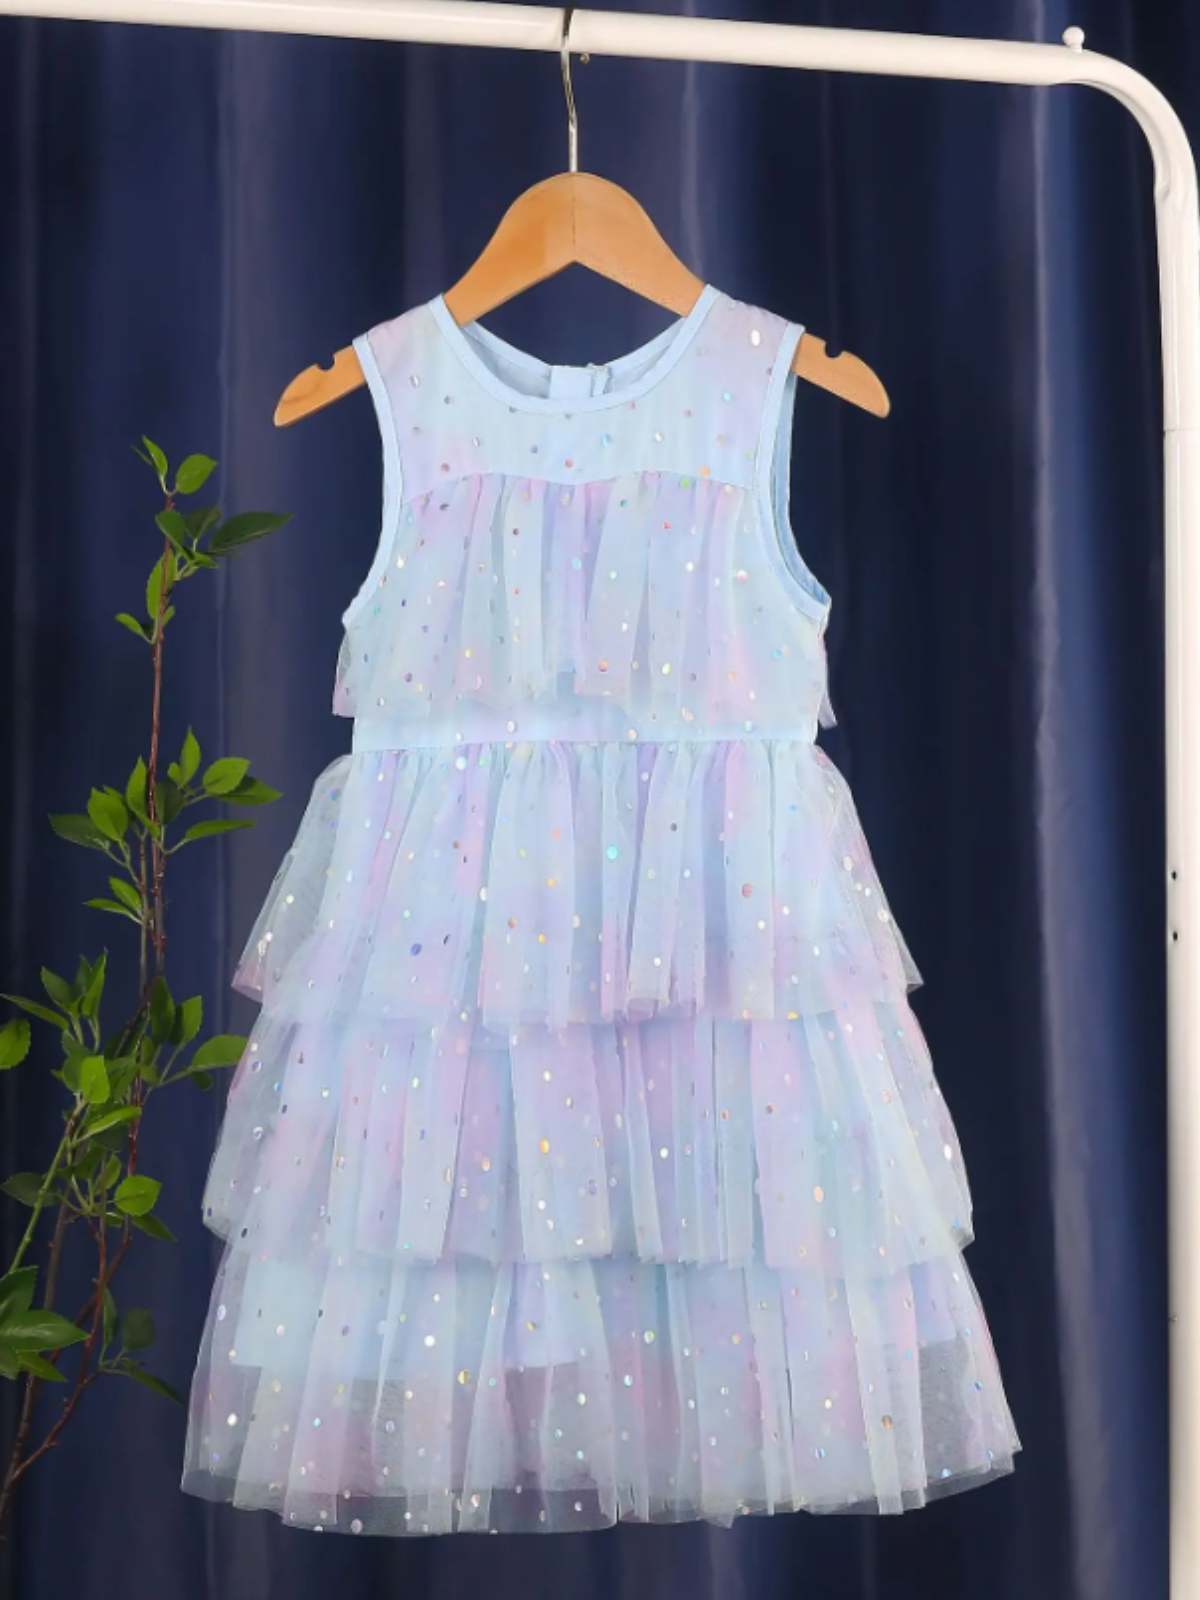 Mia Belle Girls Sequined Tiered Tulle Dress | Girls Spring Dresses